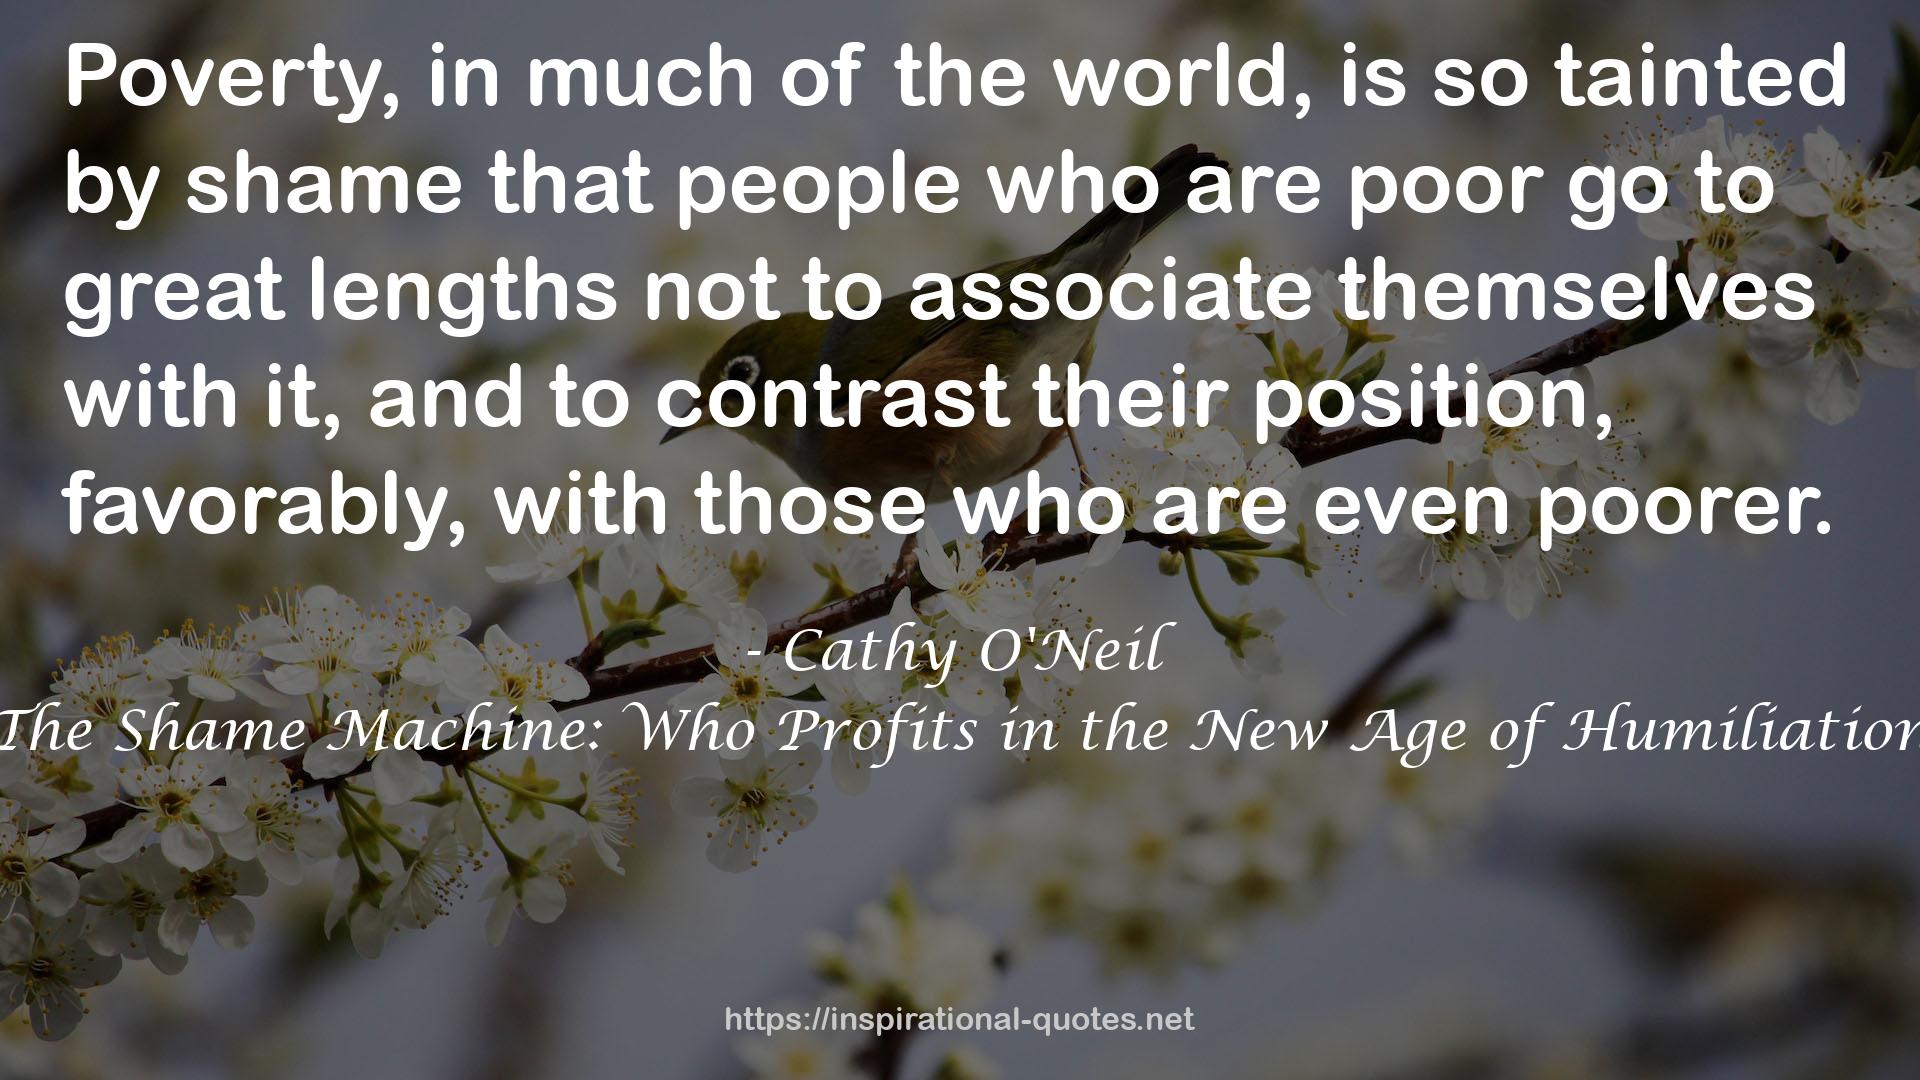 Cathy O'Neil QUOTES